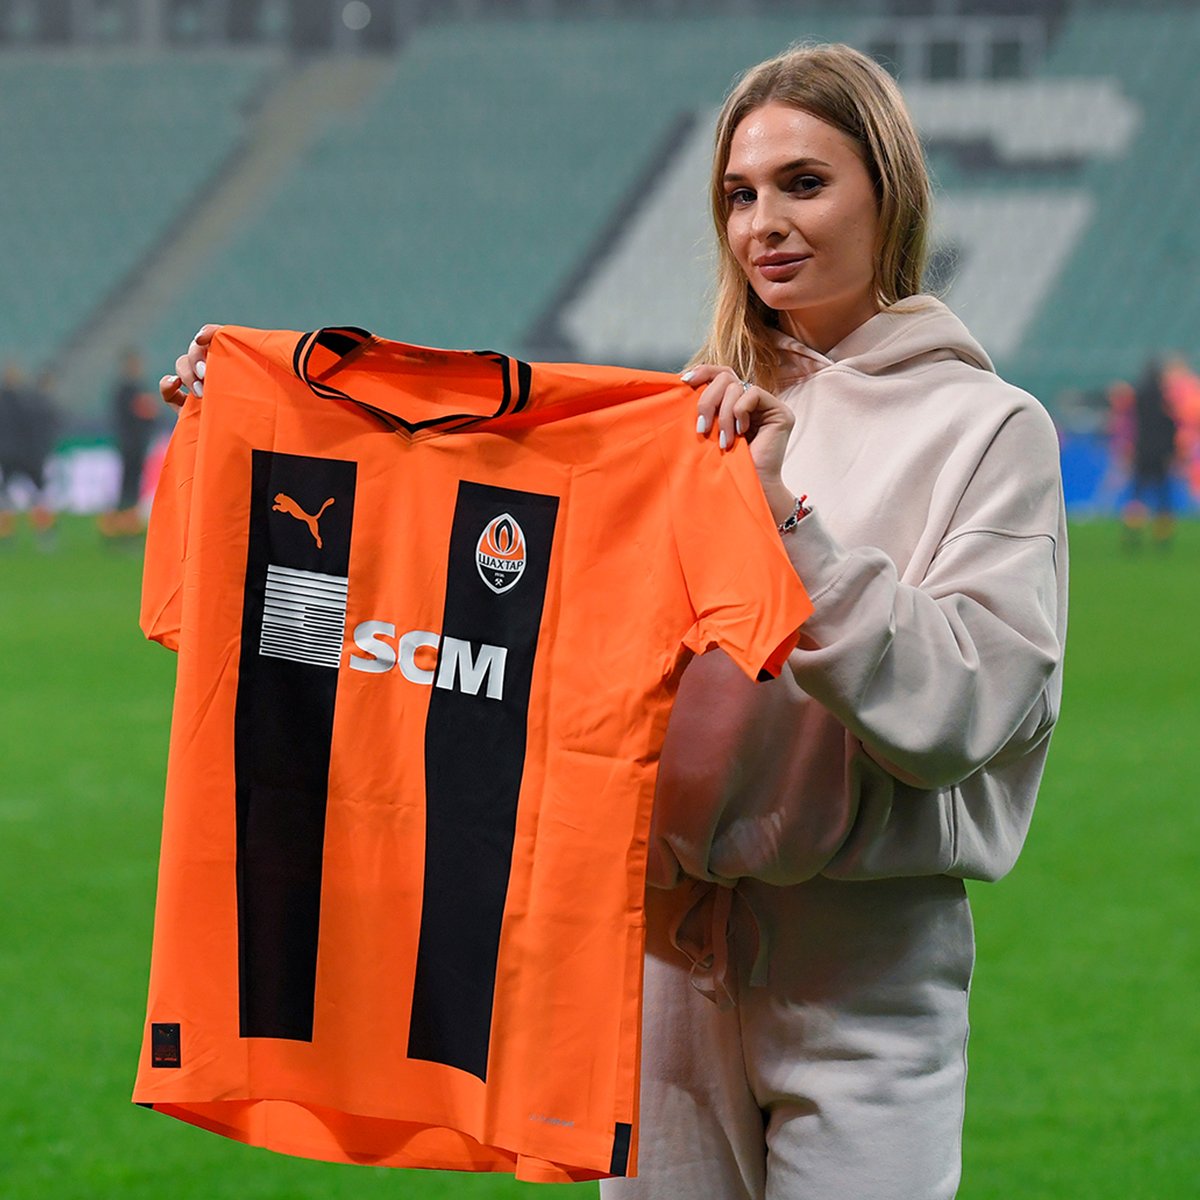 🇺🇦 Ukrainian tennis Player Dayana Yastremska @D_Yastremska supported Shakhtar ahead of the match vs RB Leipzig in Warsaw. ⚒ Darijo Srna presented the club’s jersey to the sportswoman. Dayana arrived in the capital of Poland just to support the Ukrainian team 🙏 #Shakhtar